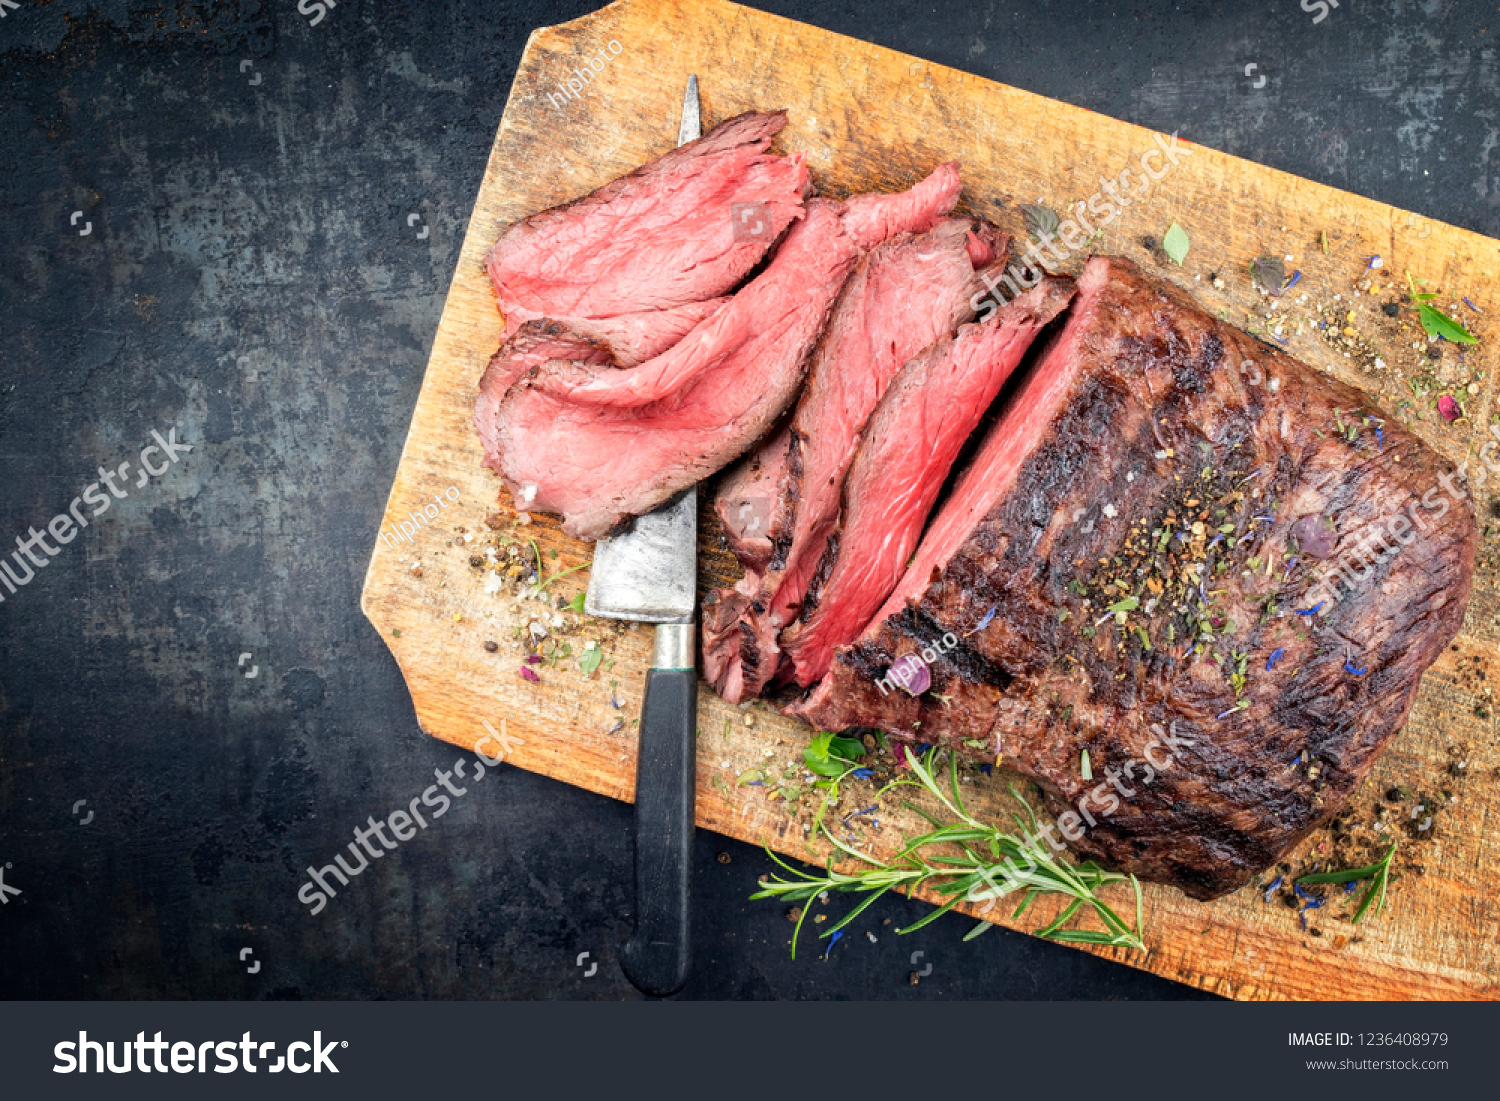 Traditional barbecue dry aged sliced roast beef steak with herbs as top view on an old cutting board with copy space left #1236408979